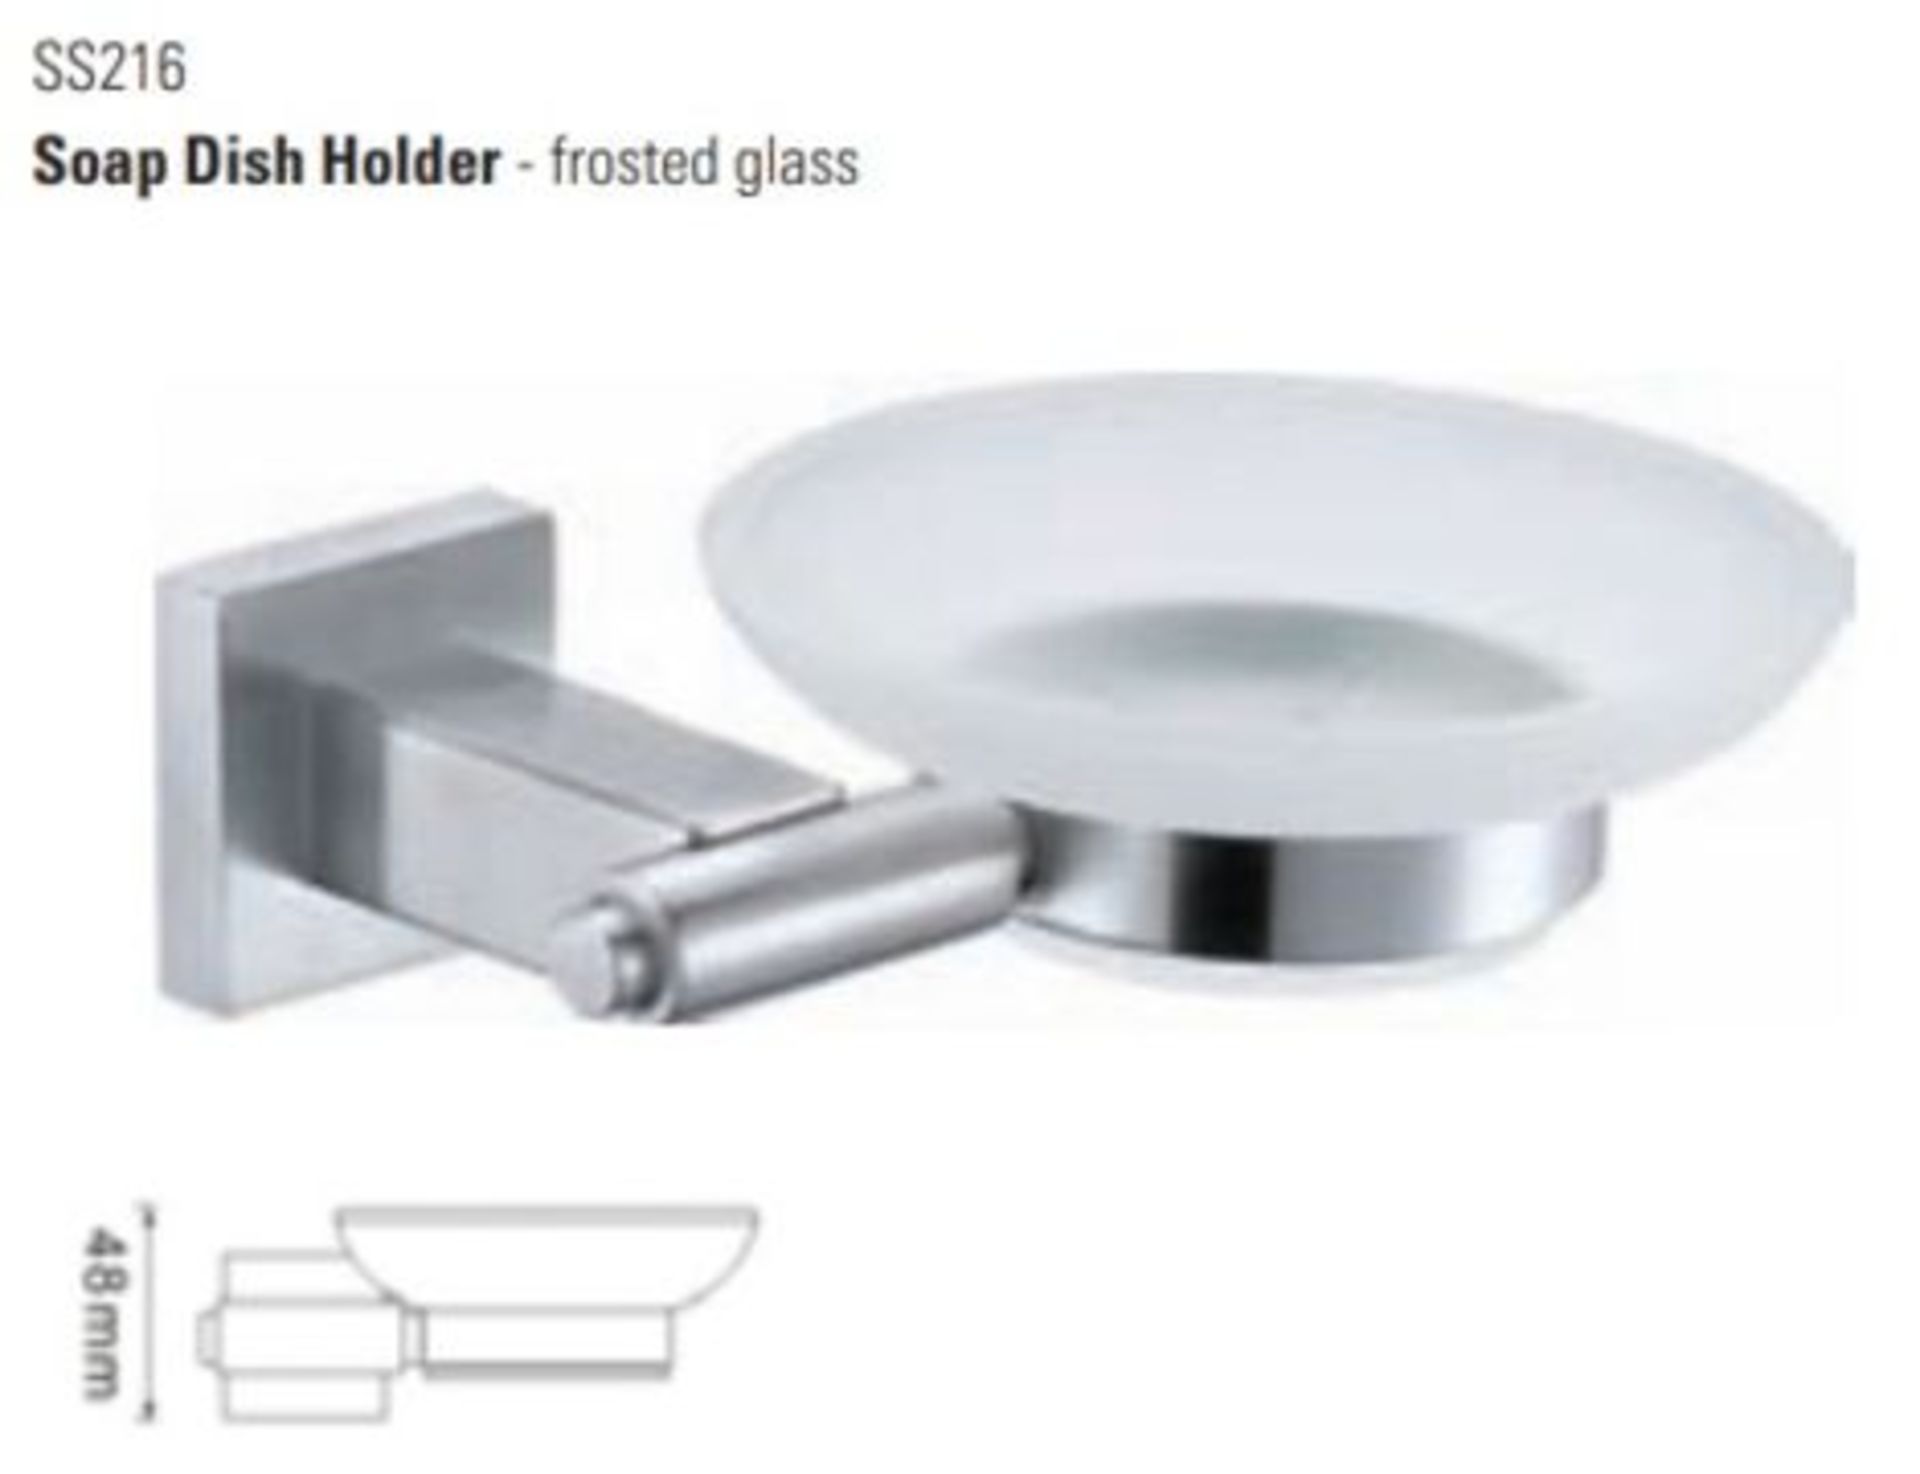 2 x Stonearth Soap Dish Holder With Frosted Glasses - Solid Stainless Steel Bathroom Accessory - - Image 2 of 2